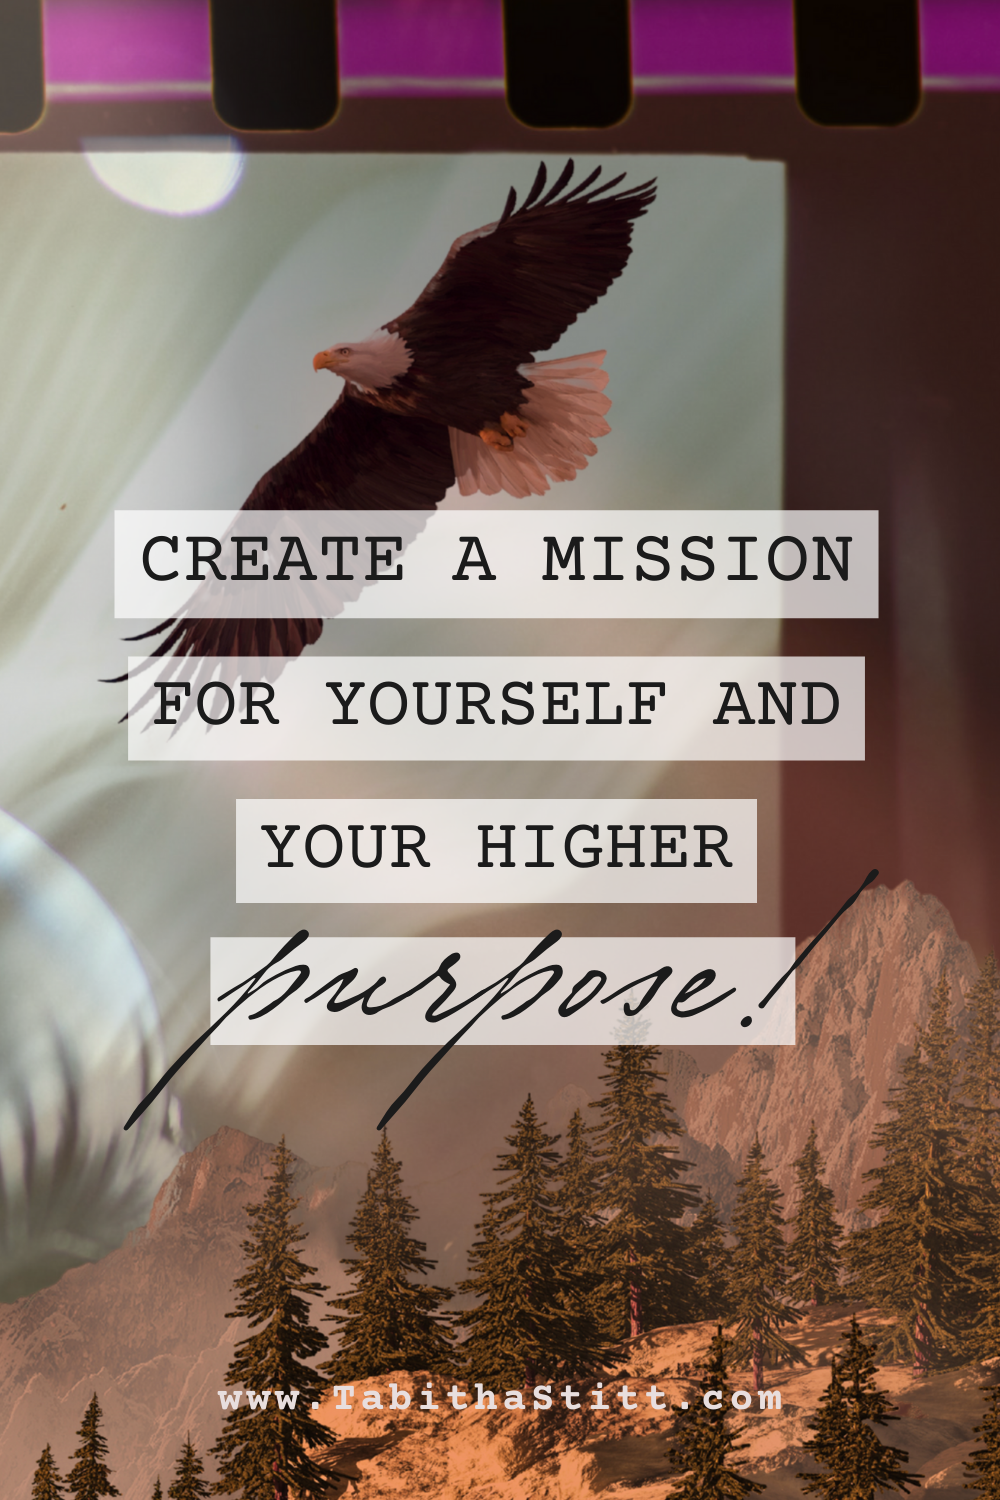 Create a Mission for Yourself and Your Higher Purpose, on The Podcast, The Self-Help Psychic with Tabitha Stitt with an Eagle for Leadership and Empowerment